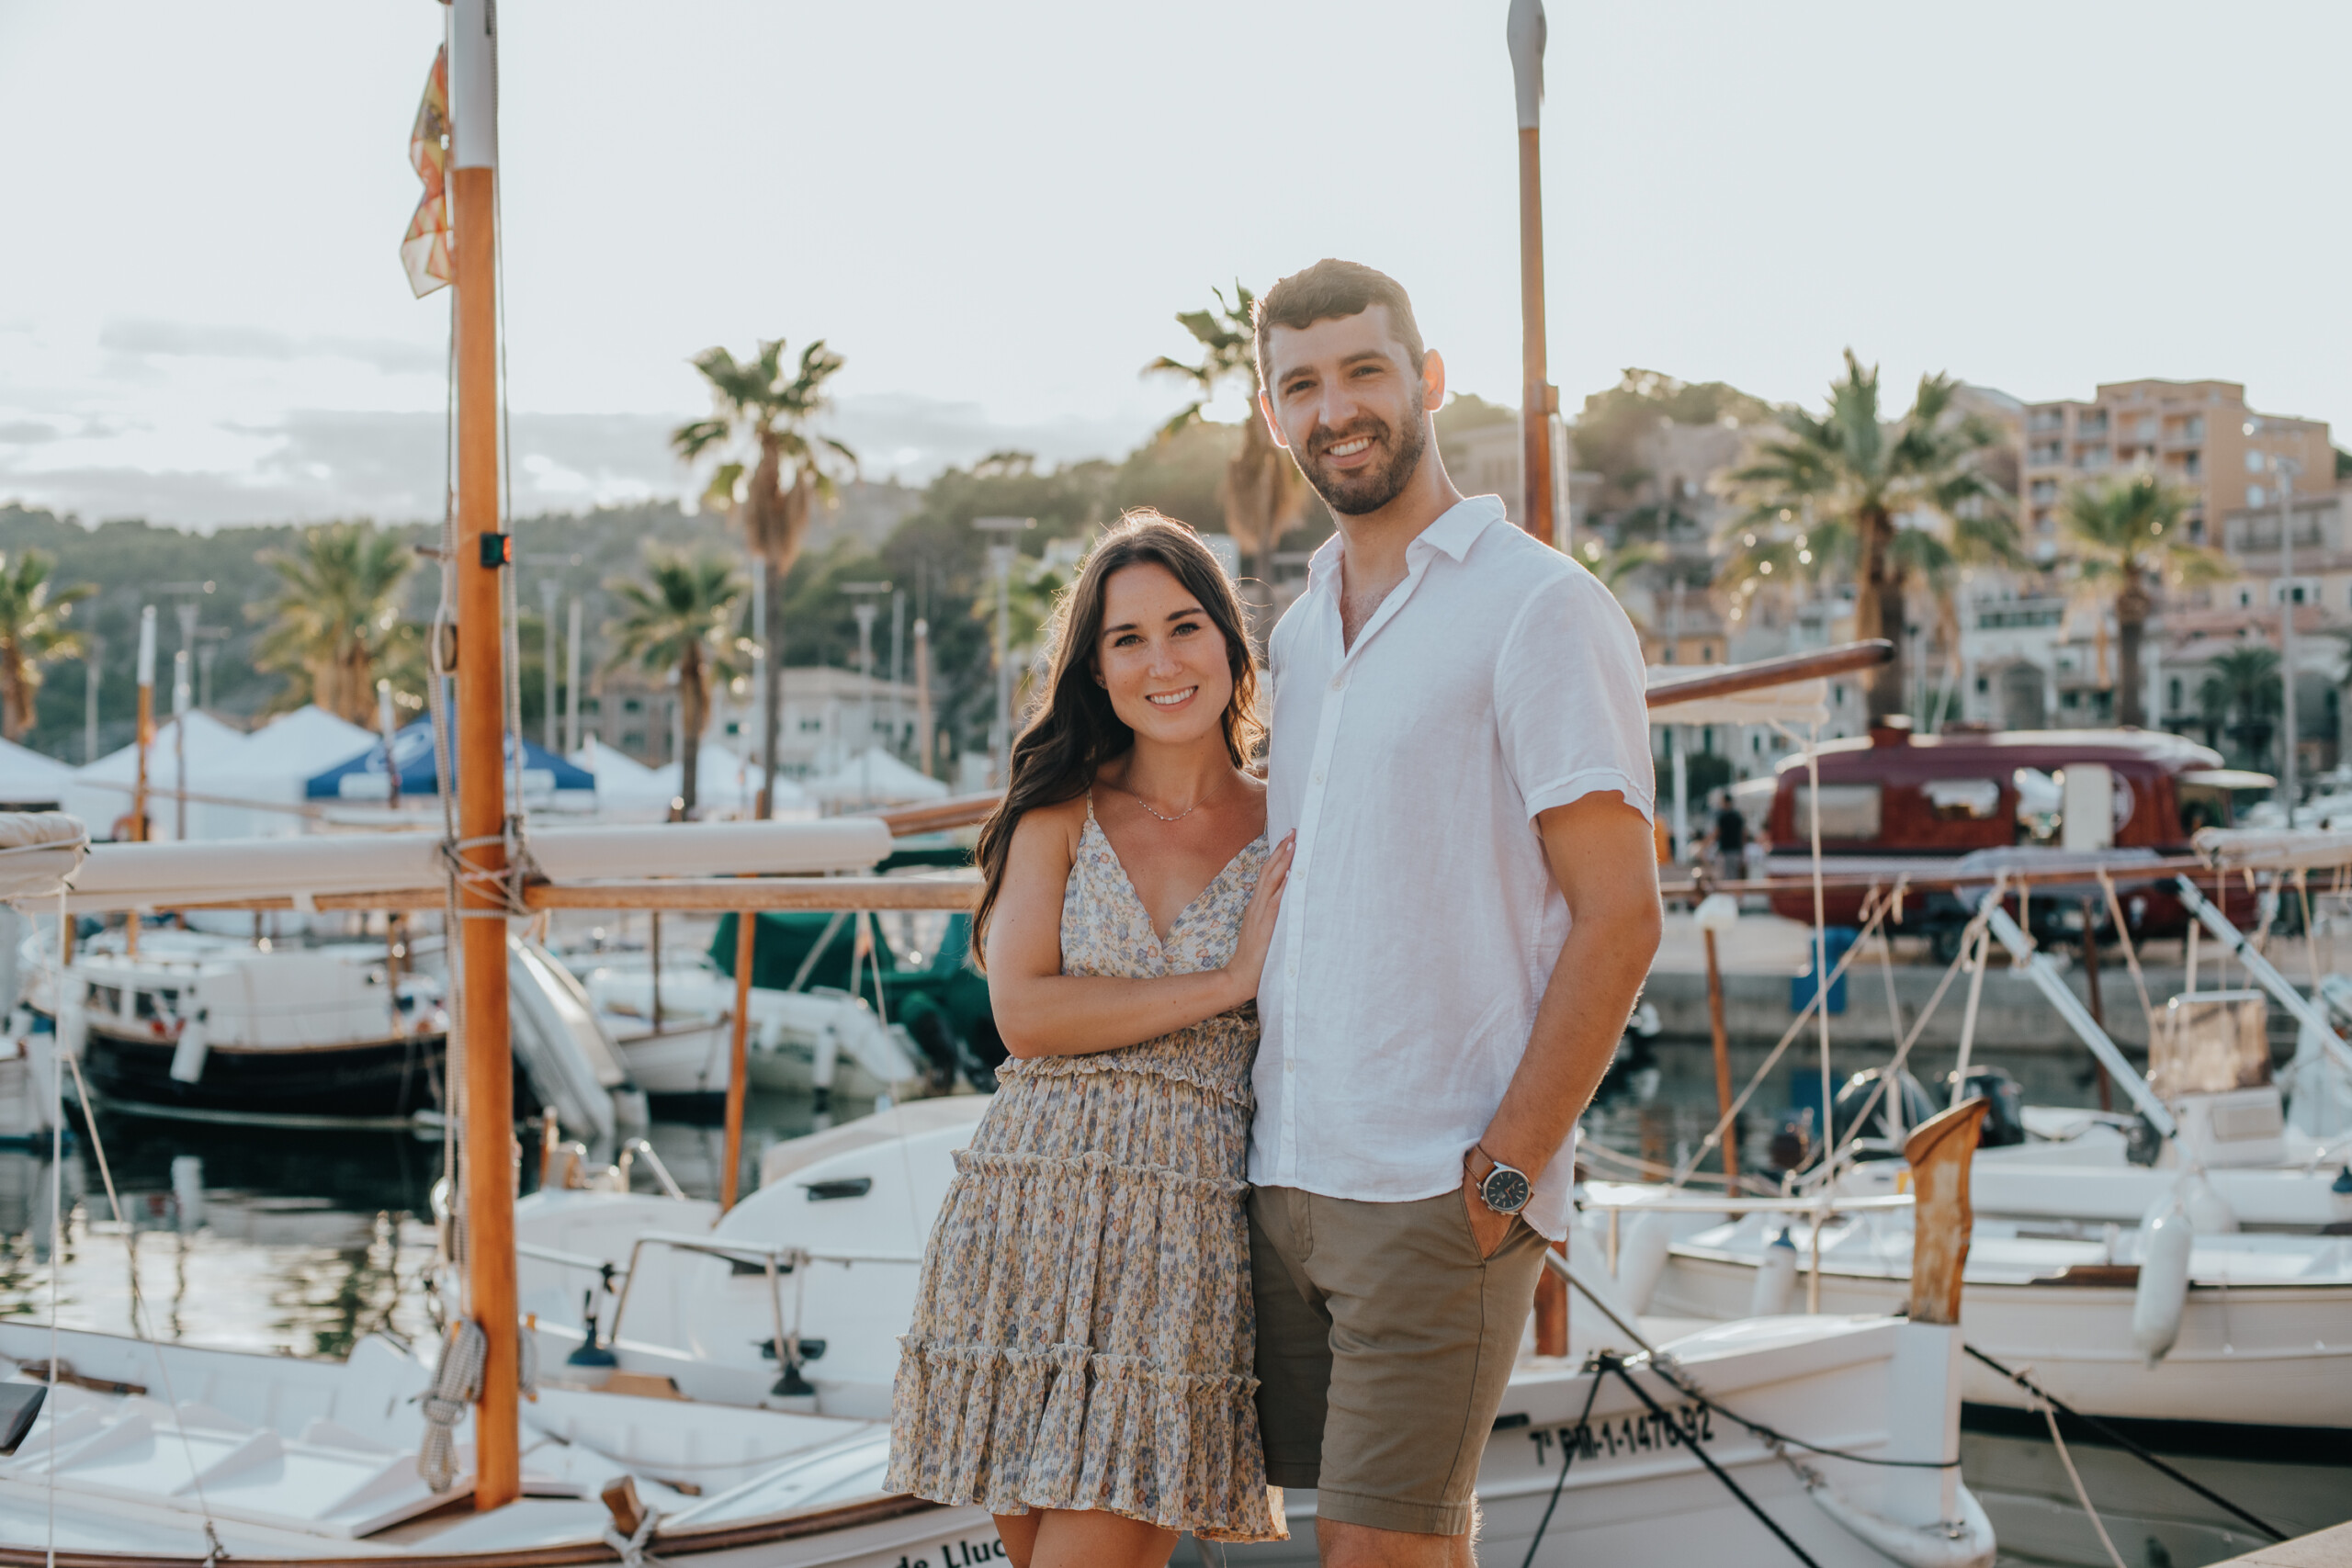 Engagement photoshoot by Laura C., Localgrapher in Mallorca